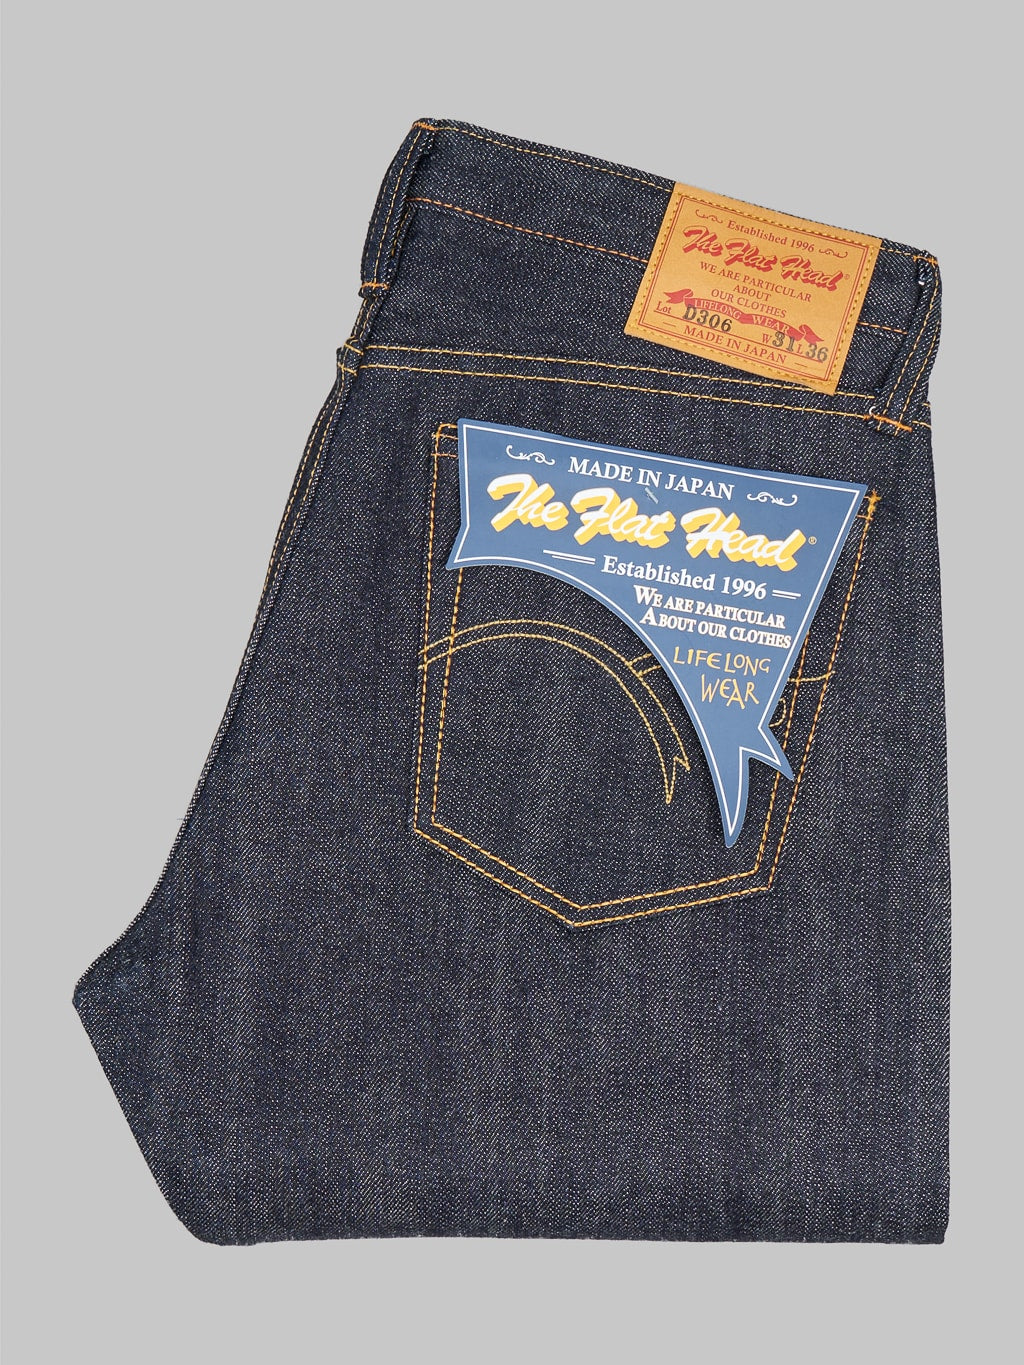 The Flat Head D306 Tight Tapered Jeans made in japan